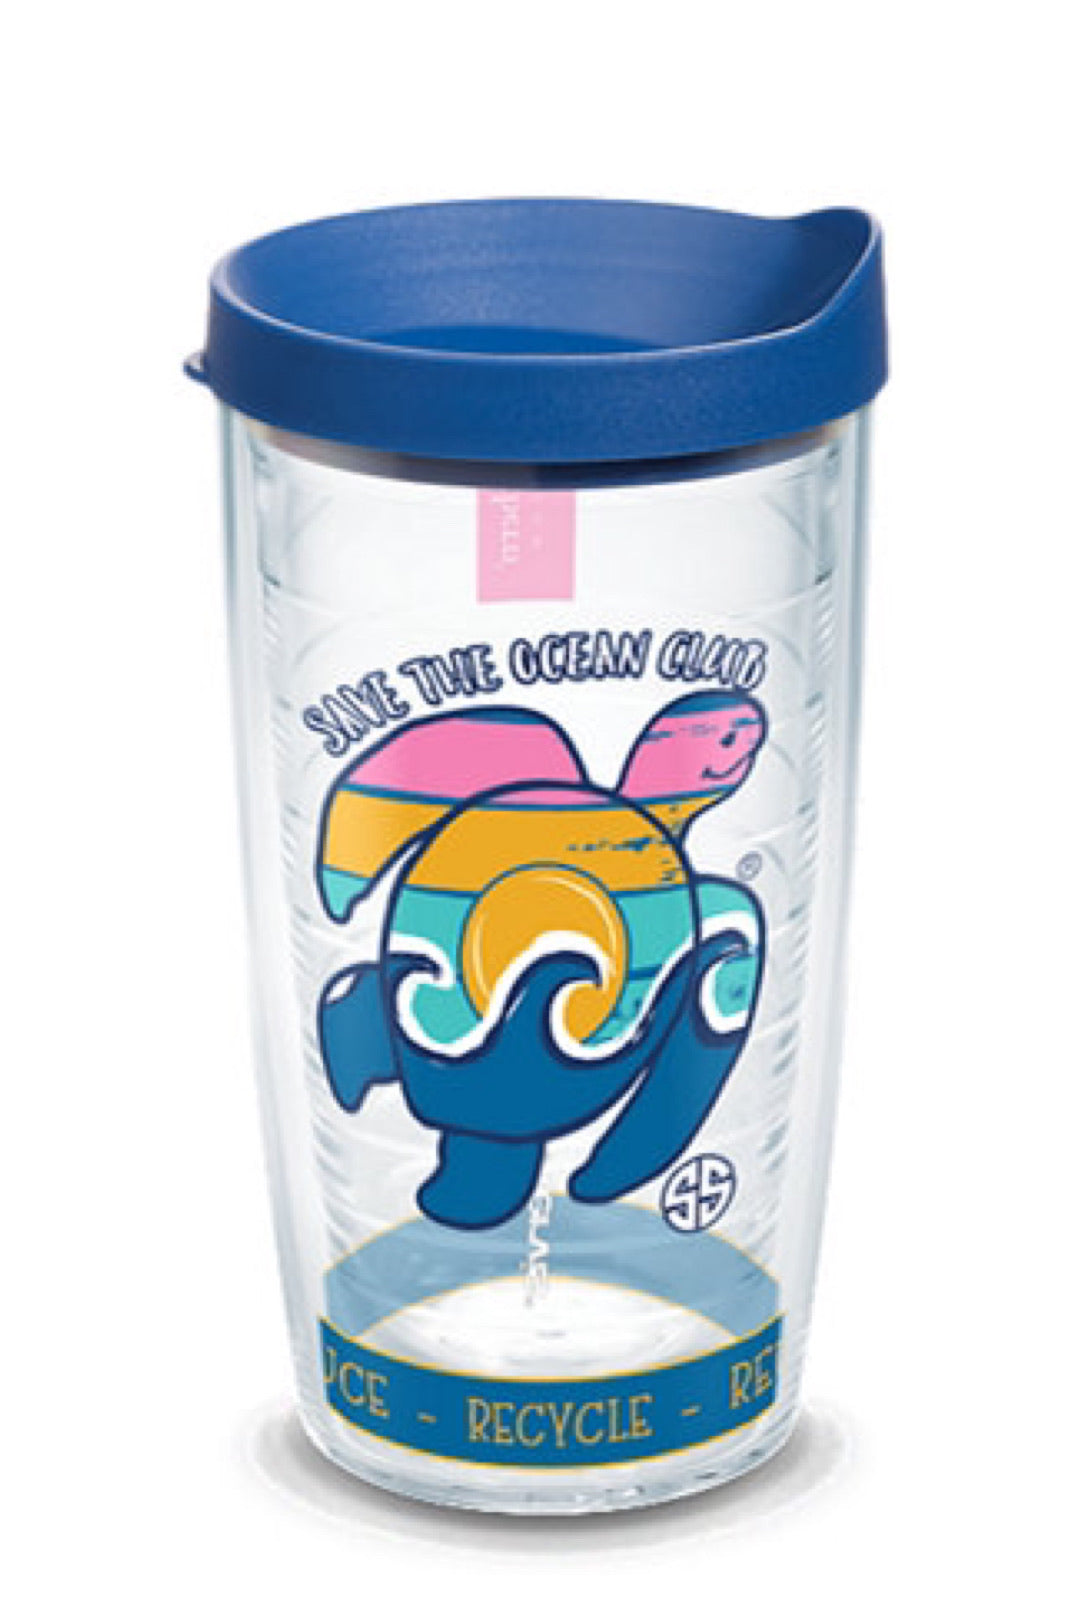 Simply Southern - Turtle Waves Plastic Tumblers by Tervis